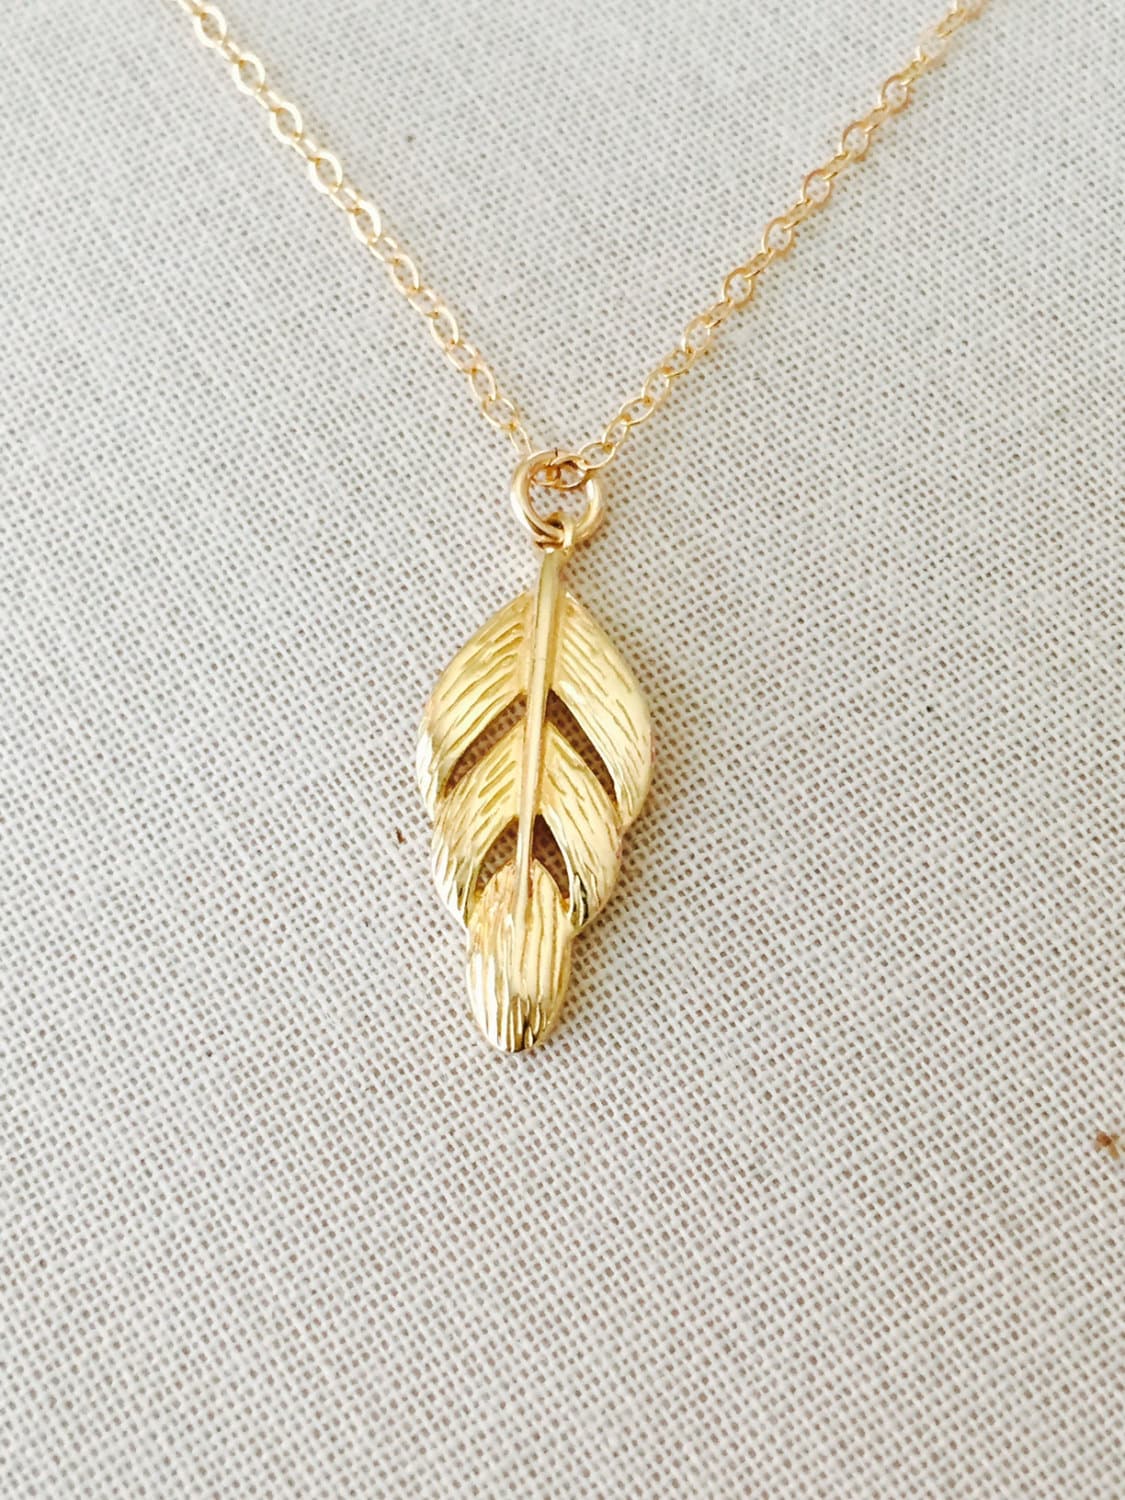 Gold Feather Charm Necklace 14k Gold Filled Chain Vermeil